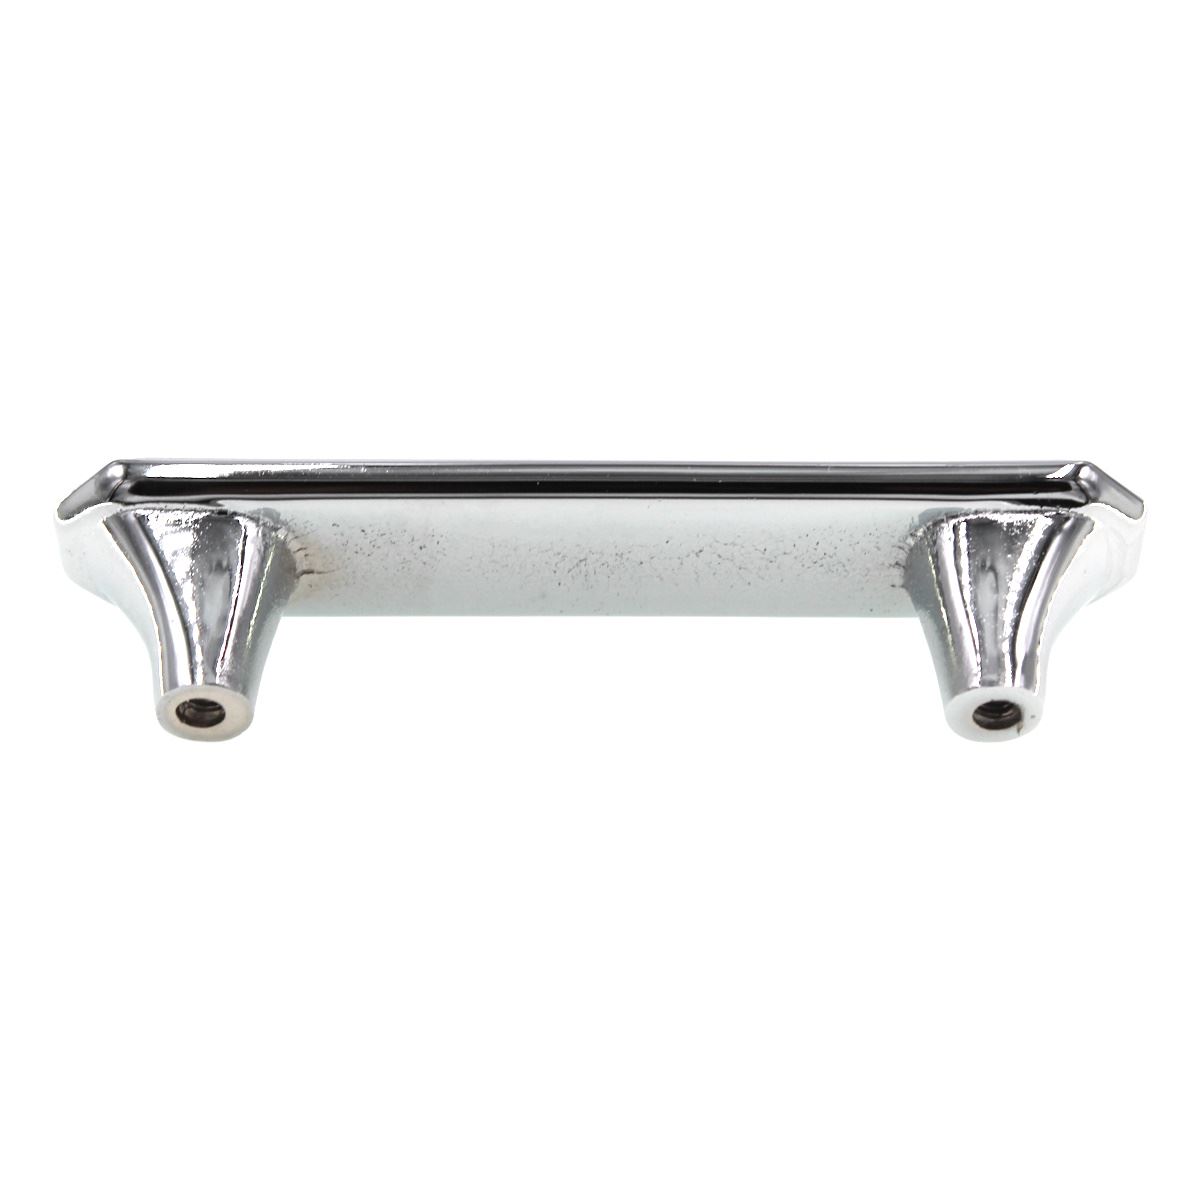 FKI Hardware Period Brass Solid Brass Cabinet Pull 3" Ctr Polished Chrome C217